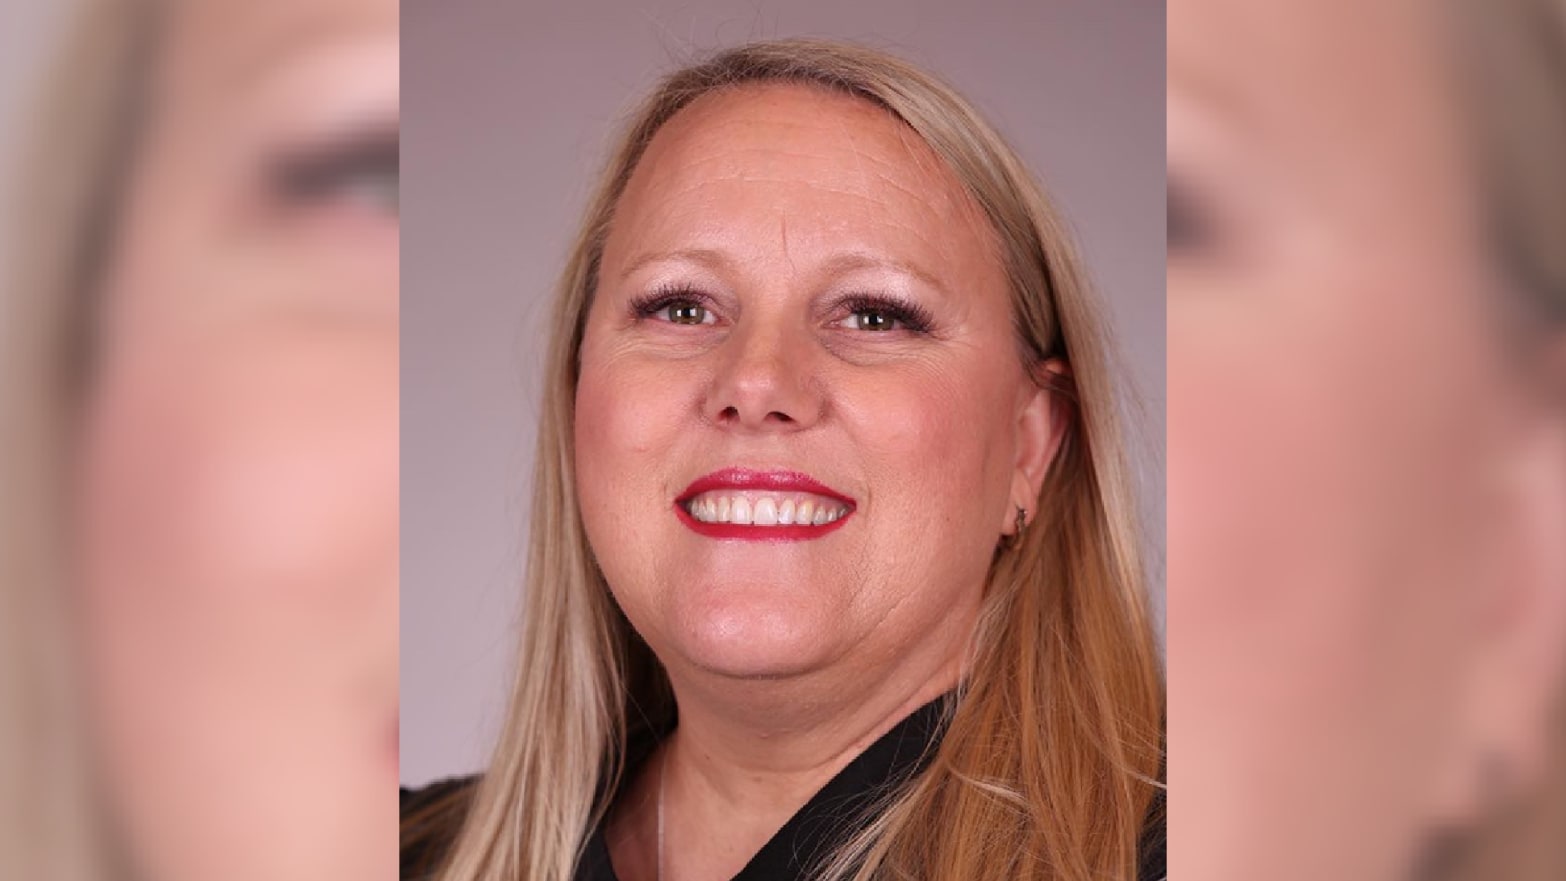 Oklahoma Judge Traci Soderstrom Busted Sending Inappropriate Texts